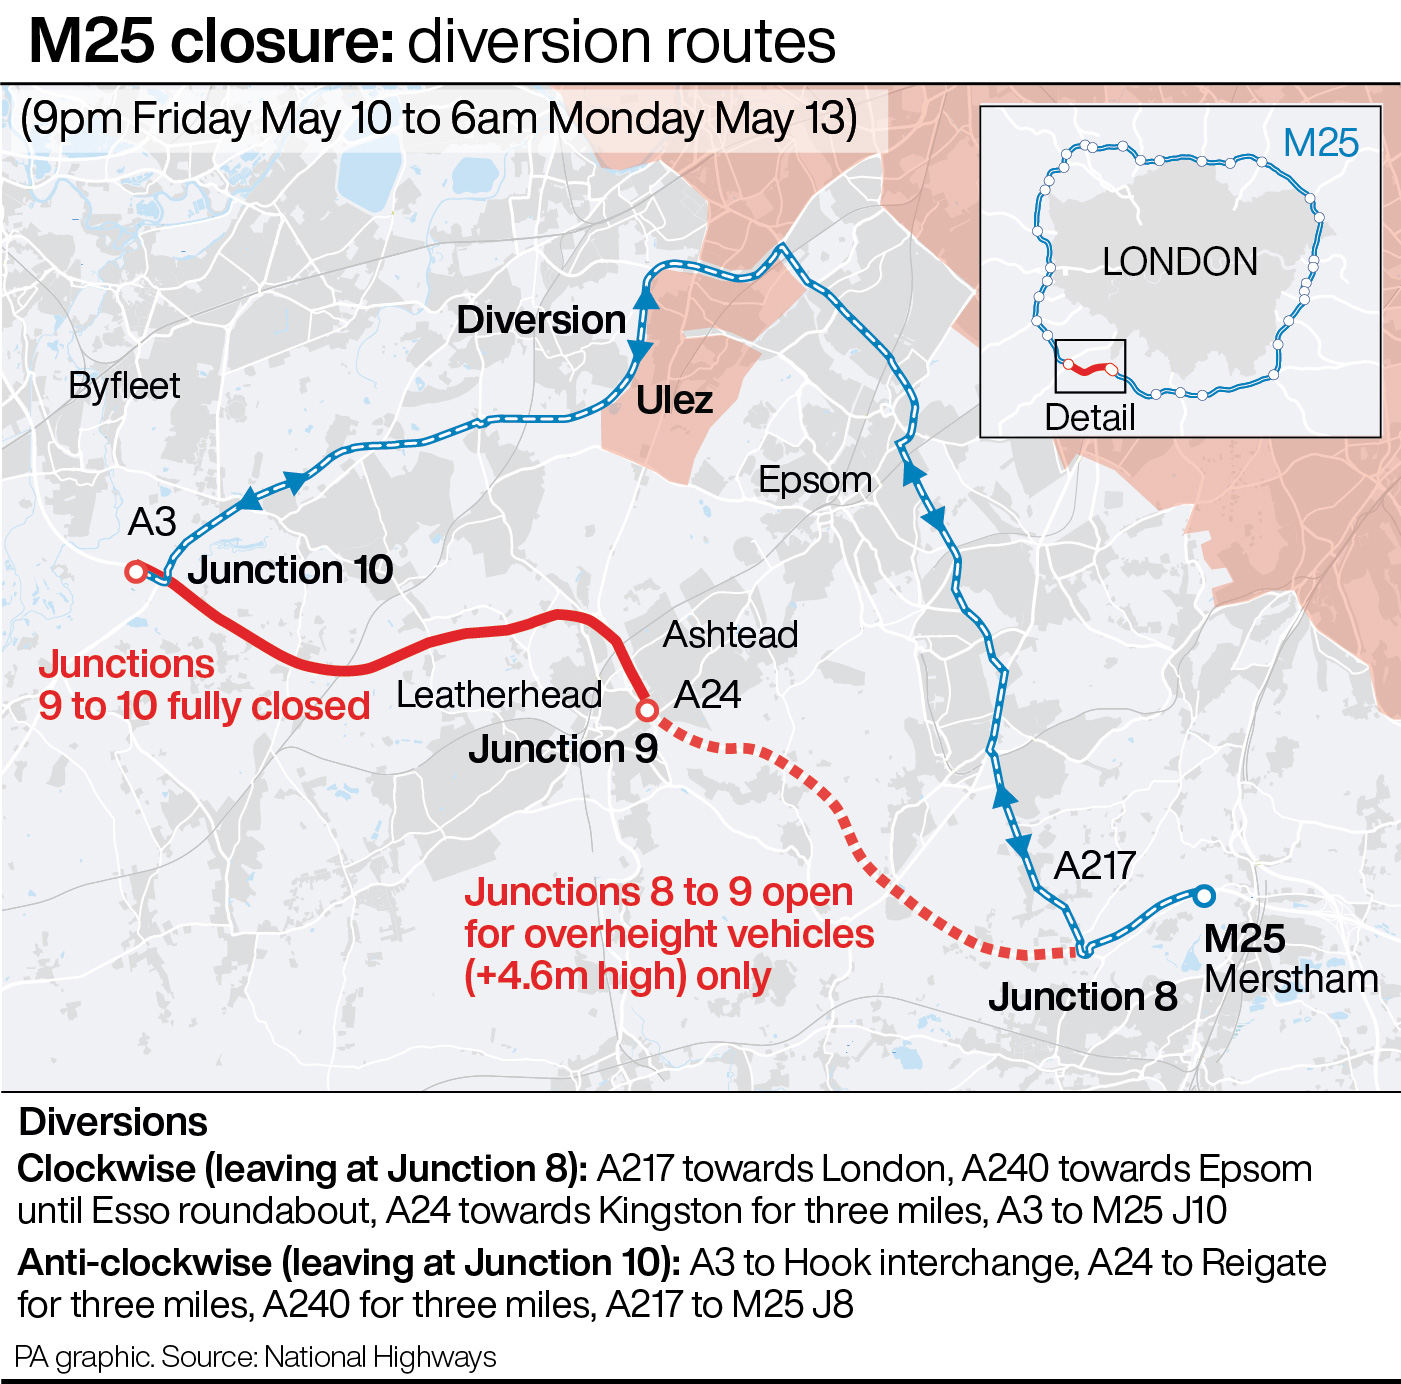 A graphic showing the diversion route during the M25 closure